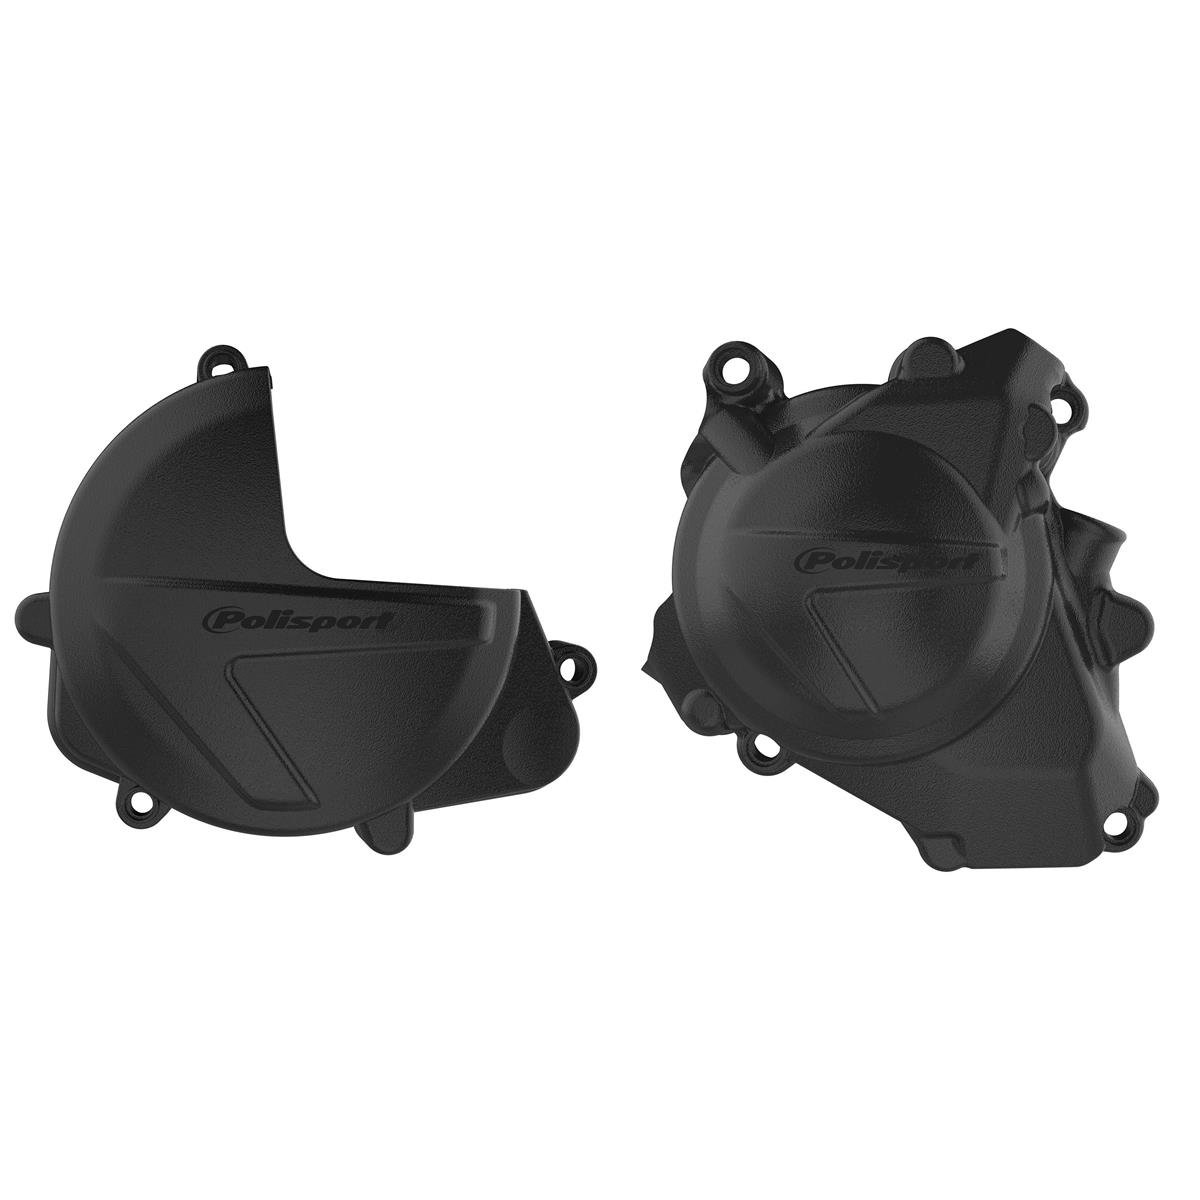 Polisport Clutch/Ignition Cover Protection  Honda CRF 450 17-20, Black